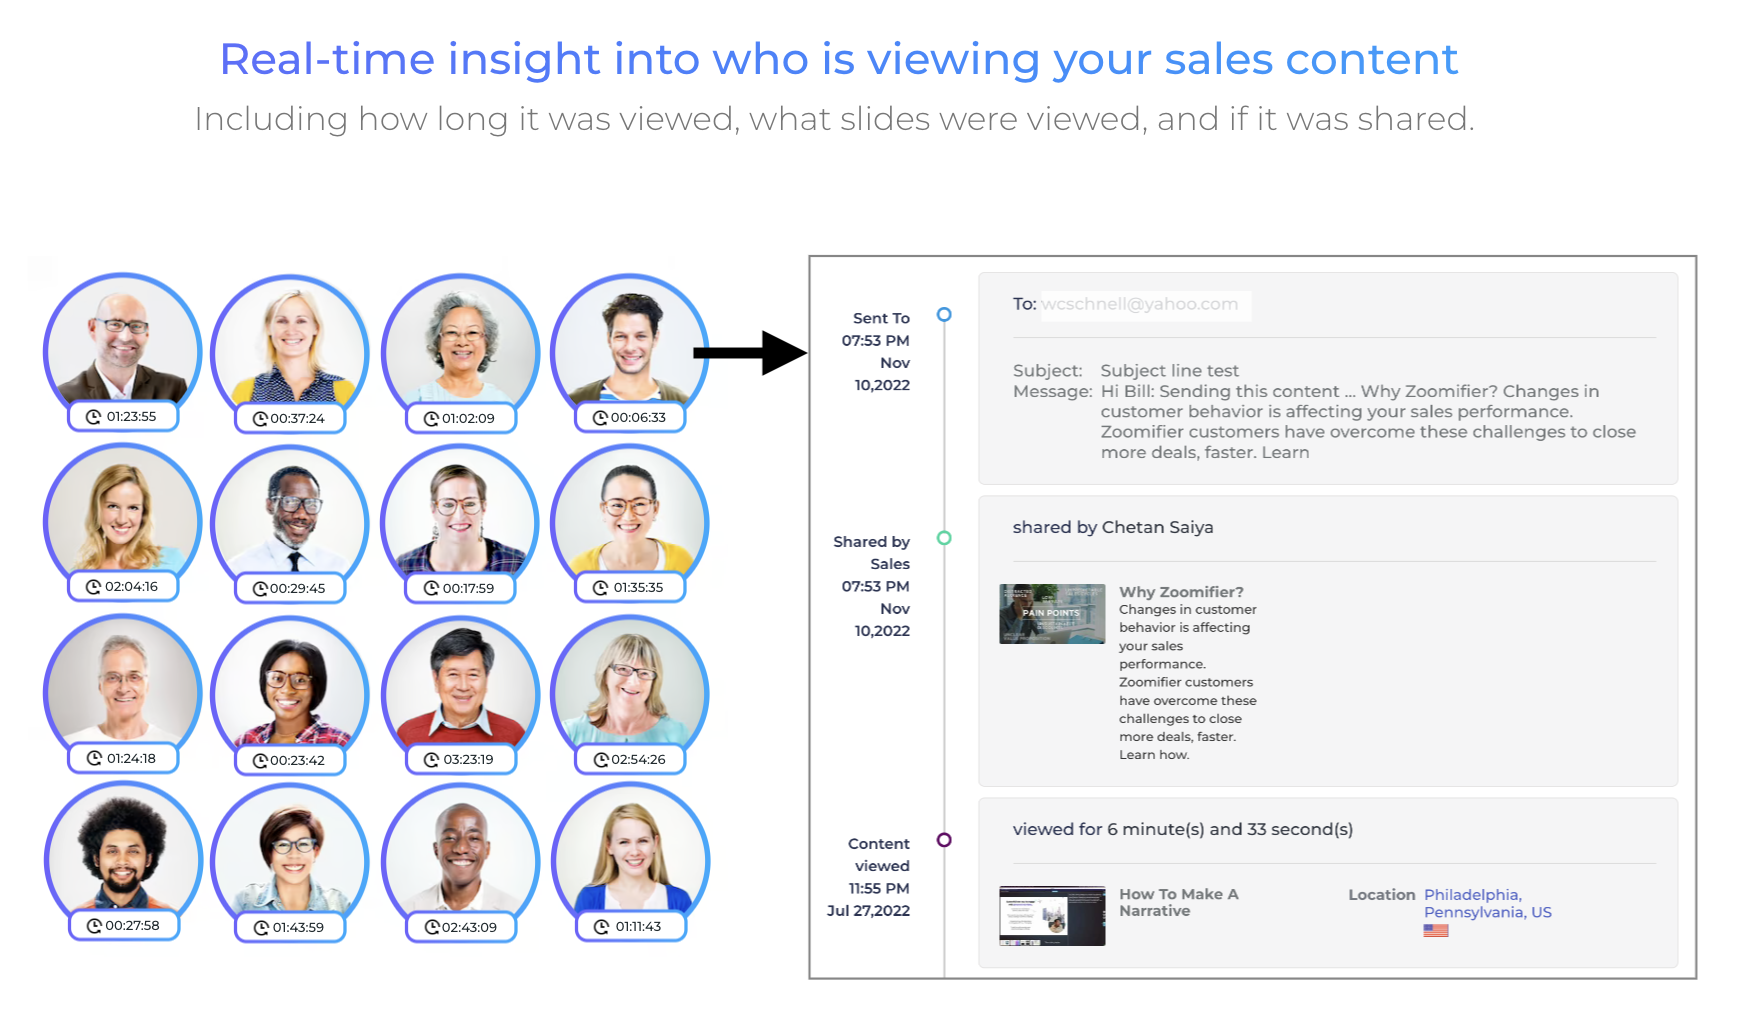 Engagement of CustomShow can be easily tracked and analyzed. It provides per-slide viewing metrics.